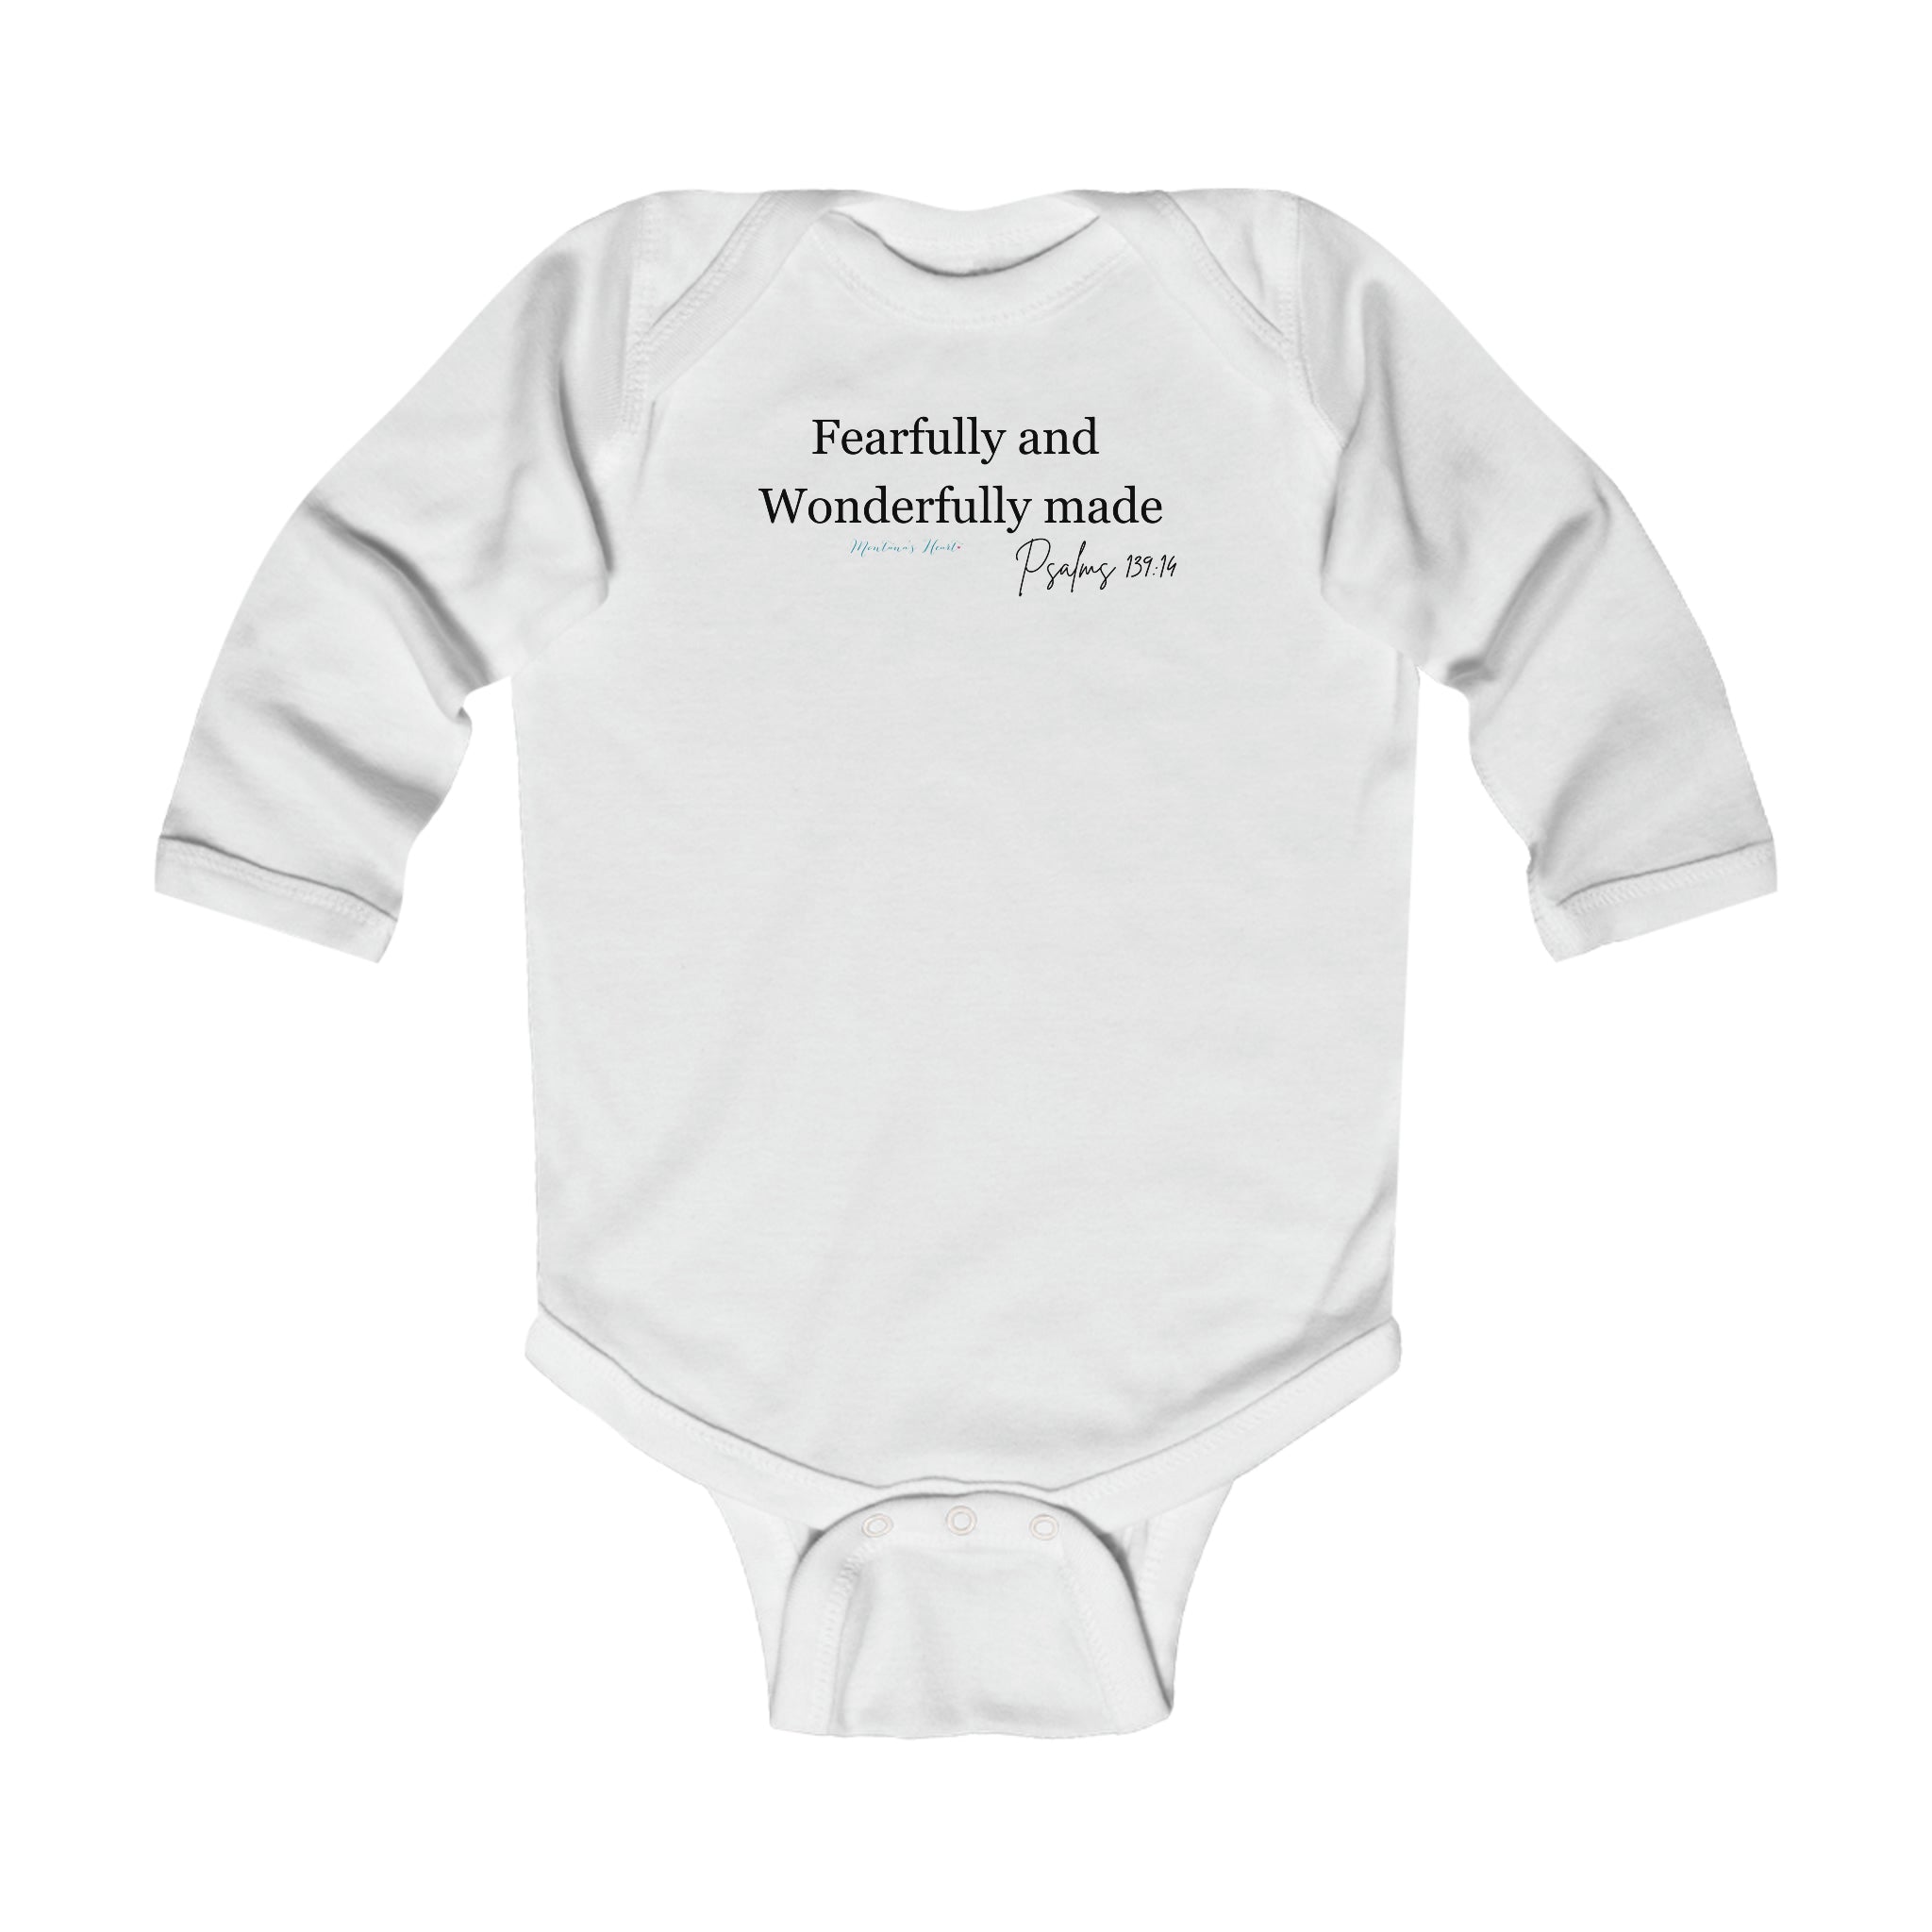 Fearfully and Wonderfully made infant onesie long sleeve